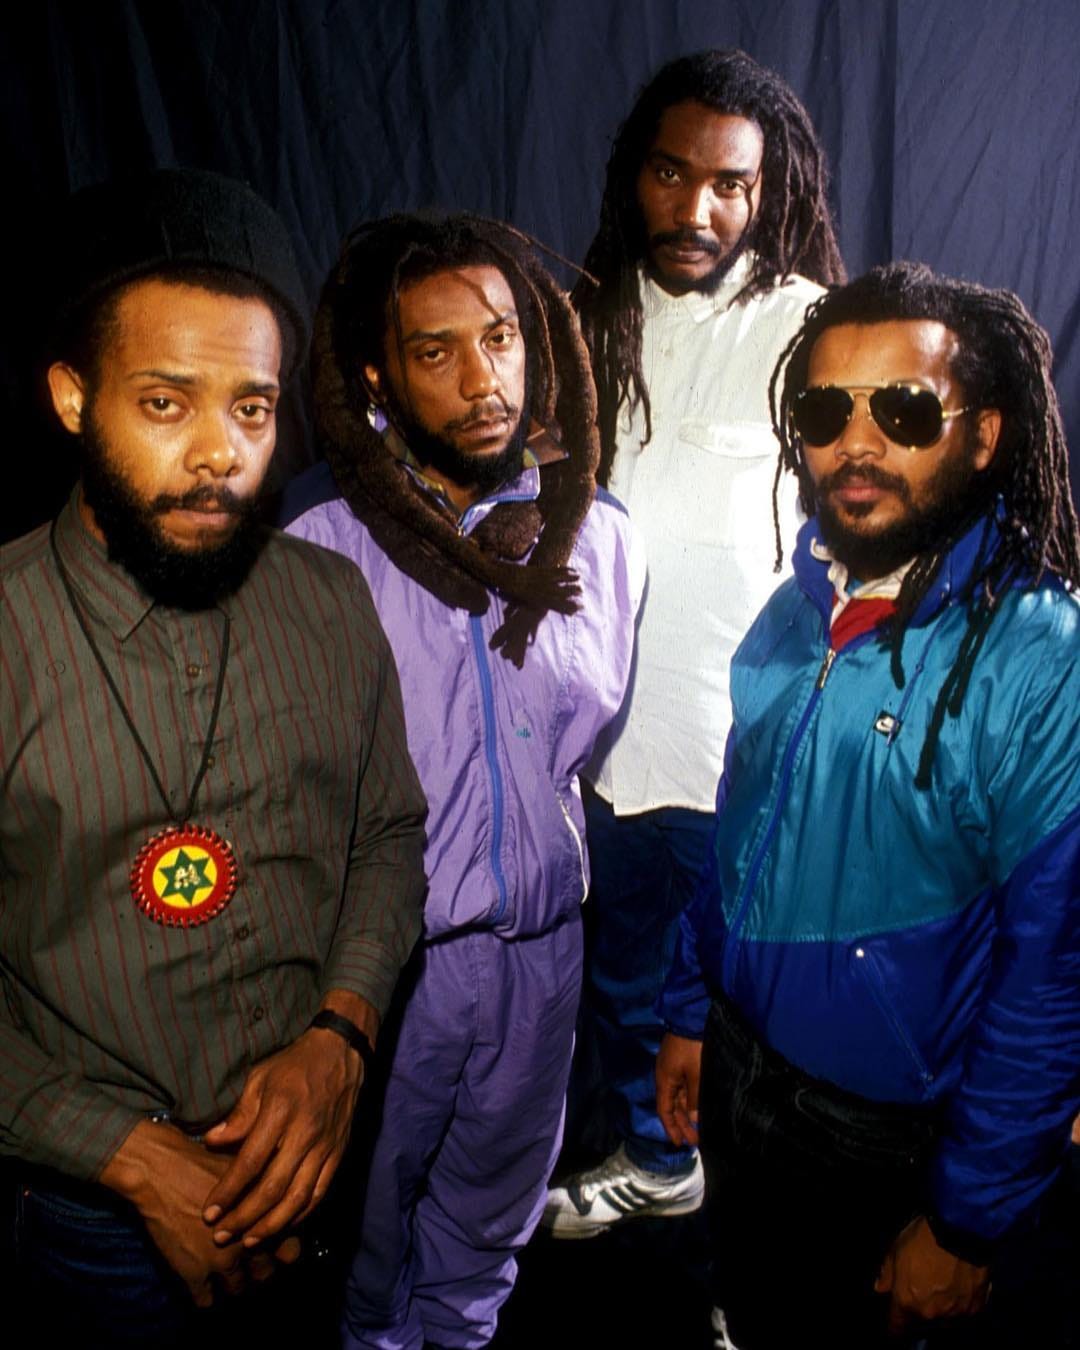 We Could Use Some Bad Brains Attitude - by HIDDEN ⓗ